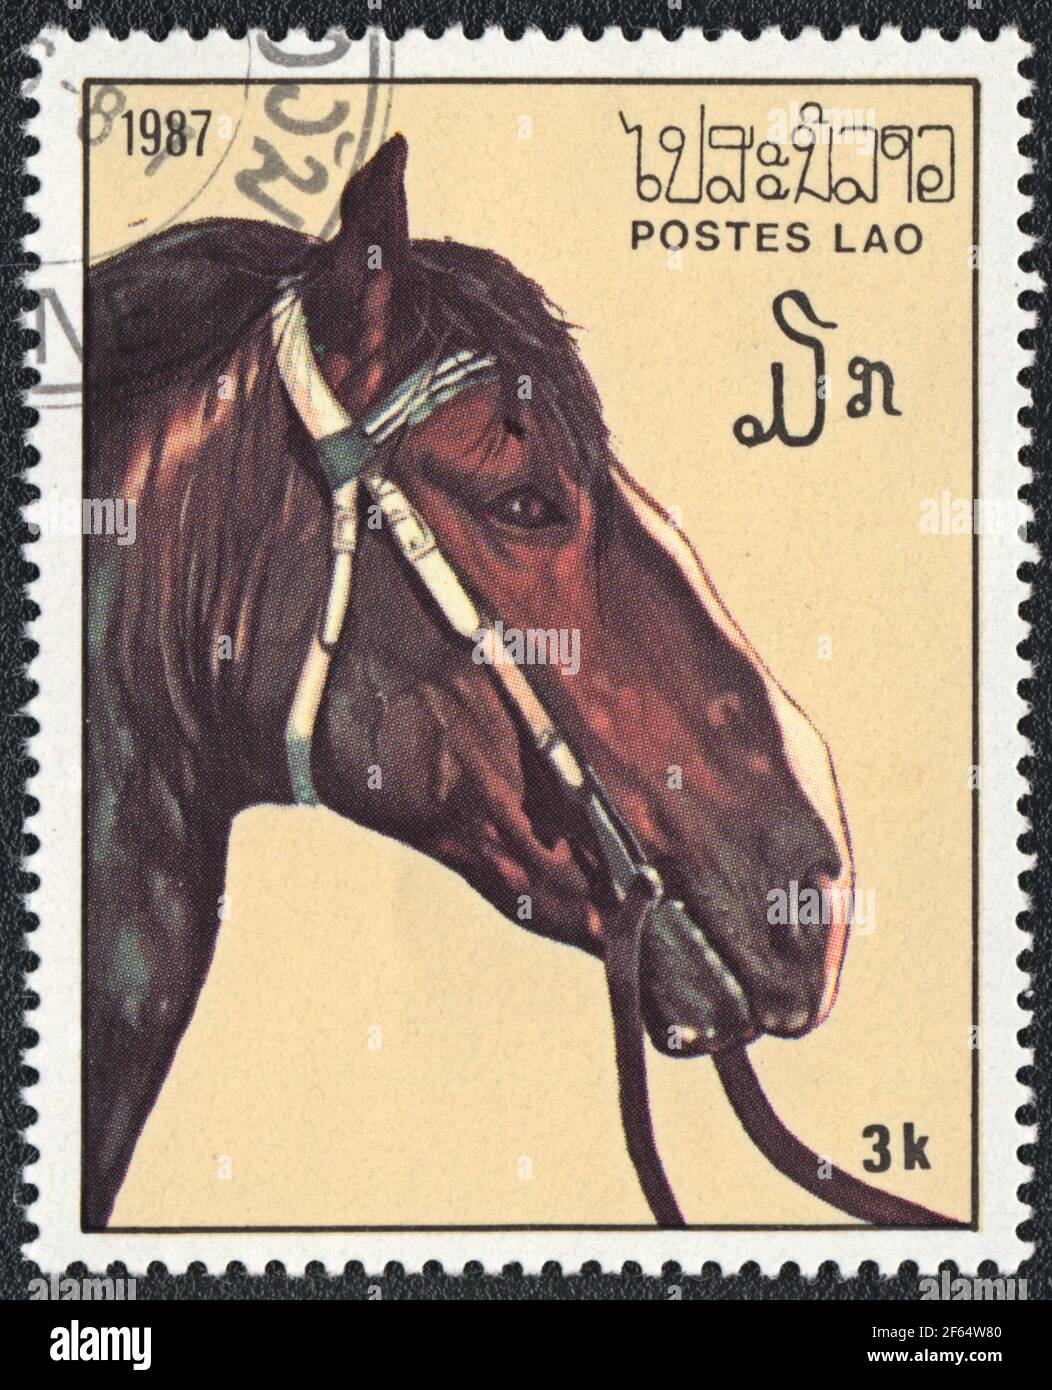 Postage stamp shows a brown harness horse (Equus ferus caballus) from series: Thoroughbred Horses, Laos, 1987 Stock Photo